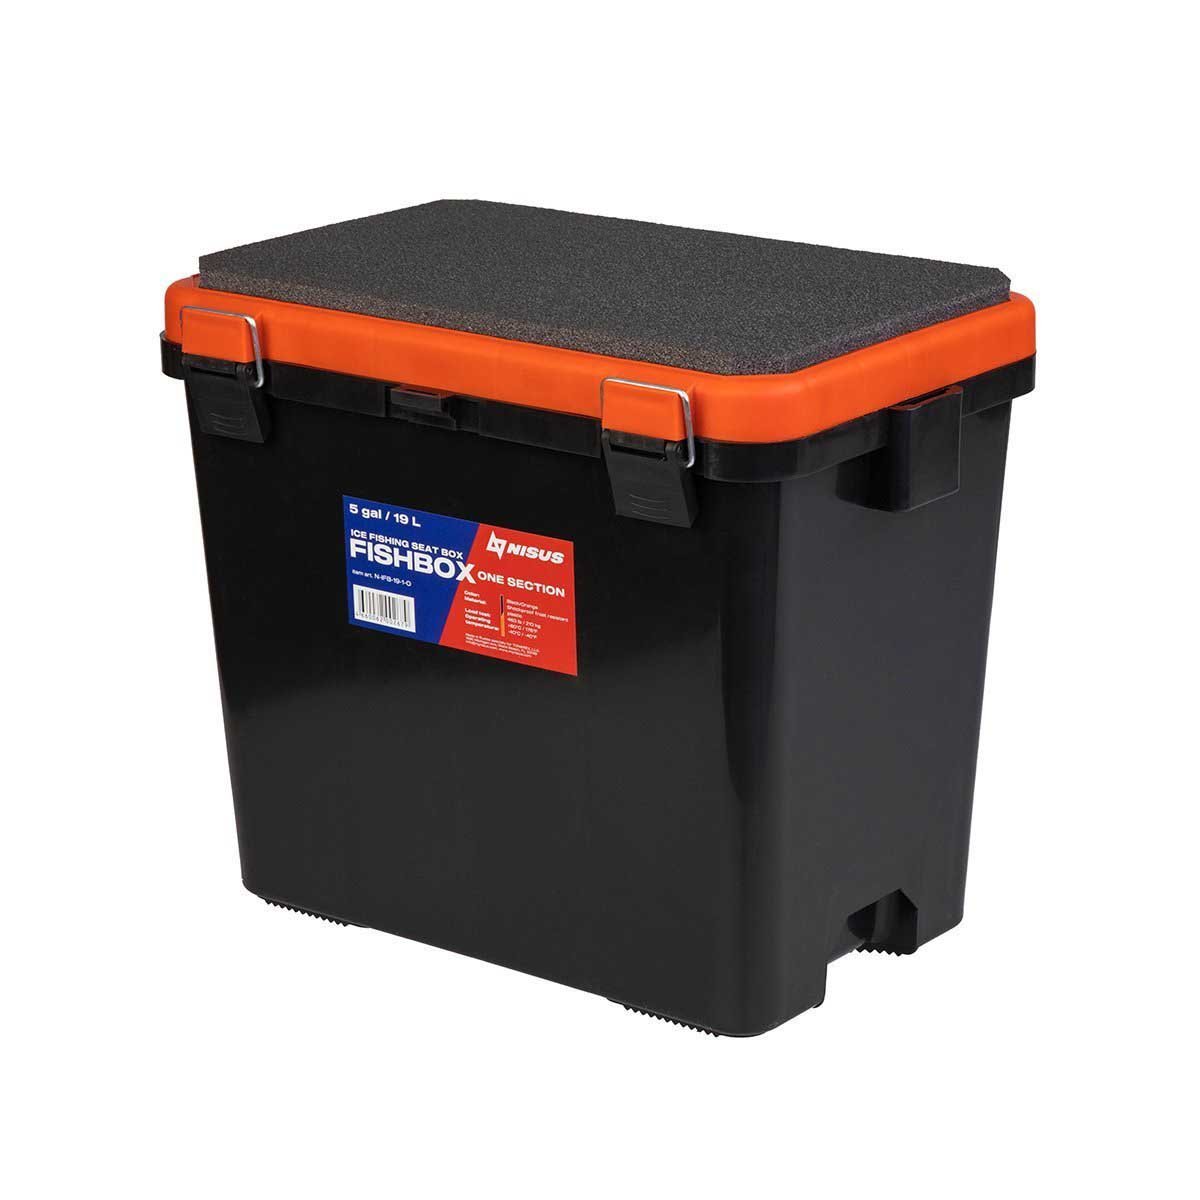 FishBox Large 5 gal SeatBox for Ice Fishing Tackle and Gear, orange